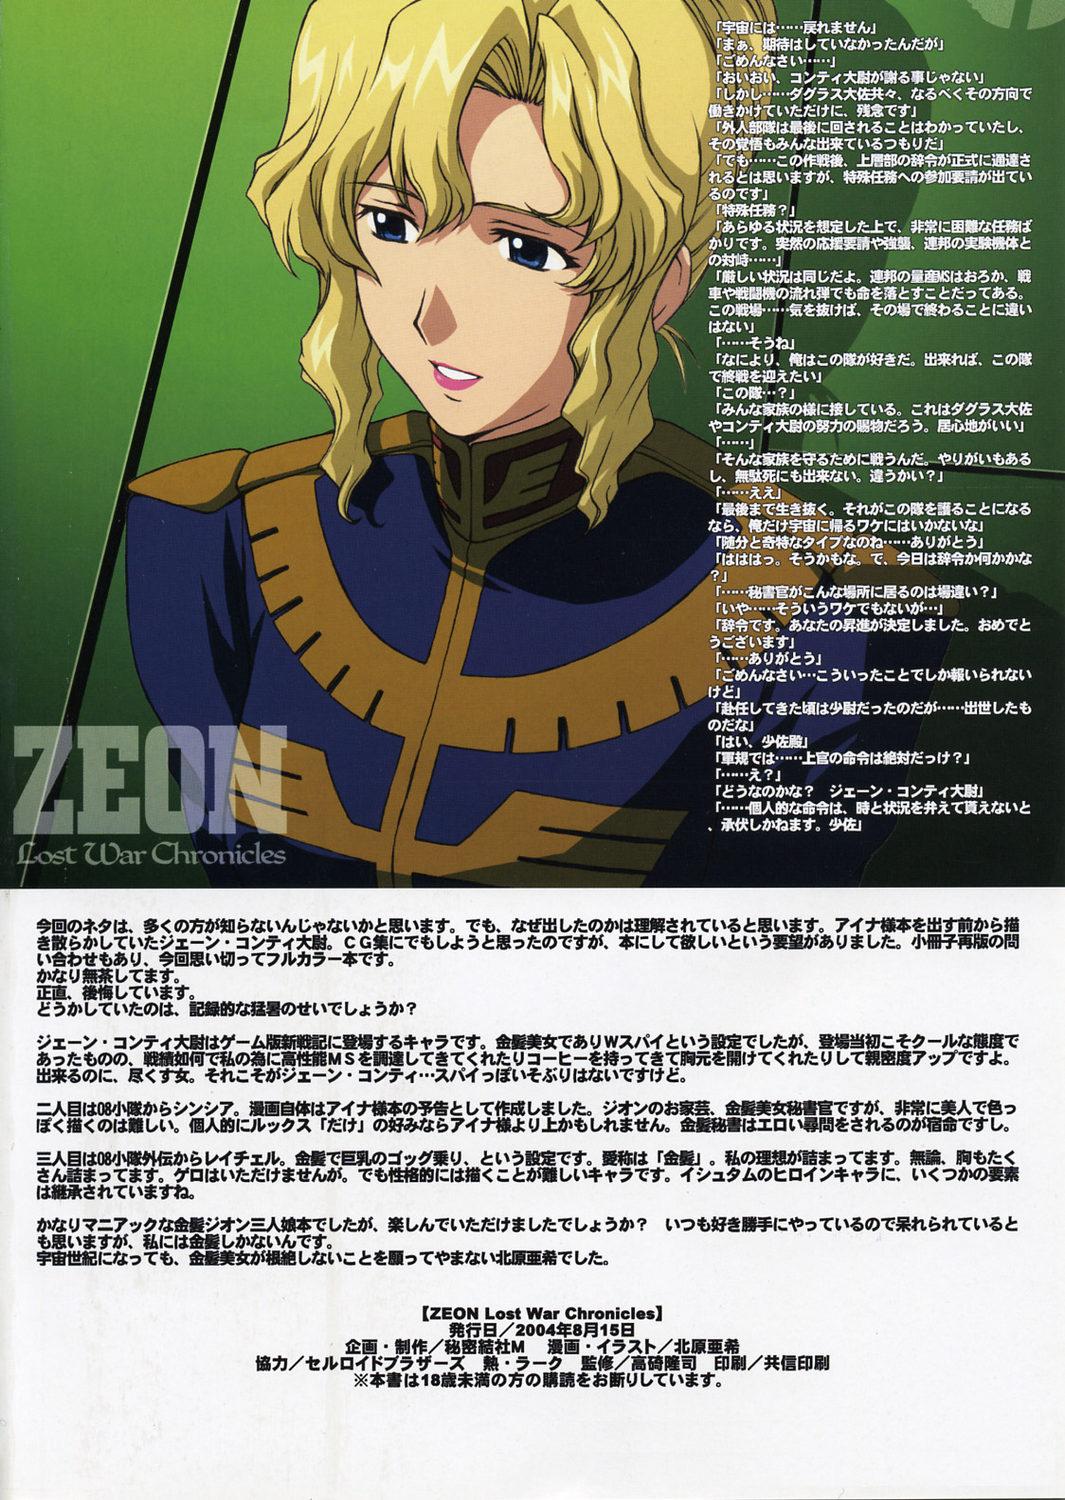 Messy ZEON Lost War Chronicles - Mobile suit gundam lost war chronicles Soapy - Page 33